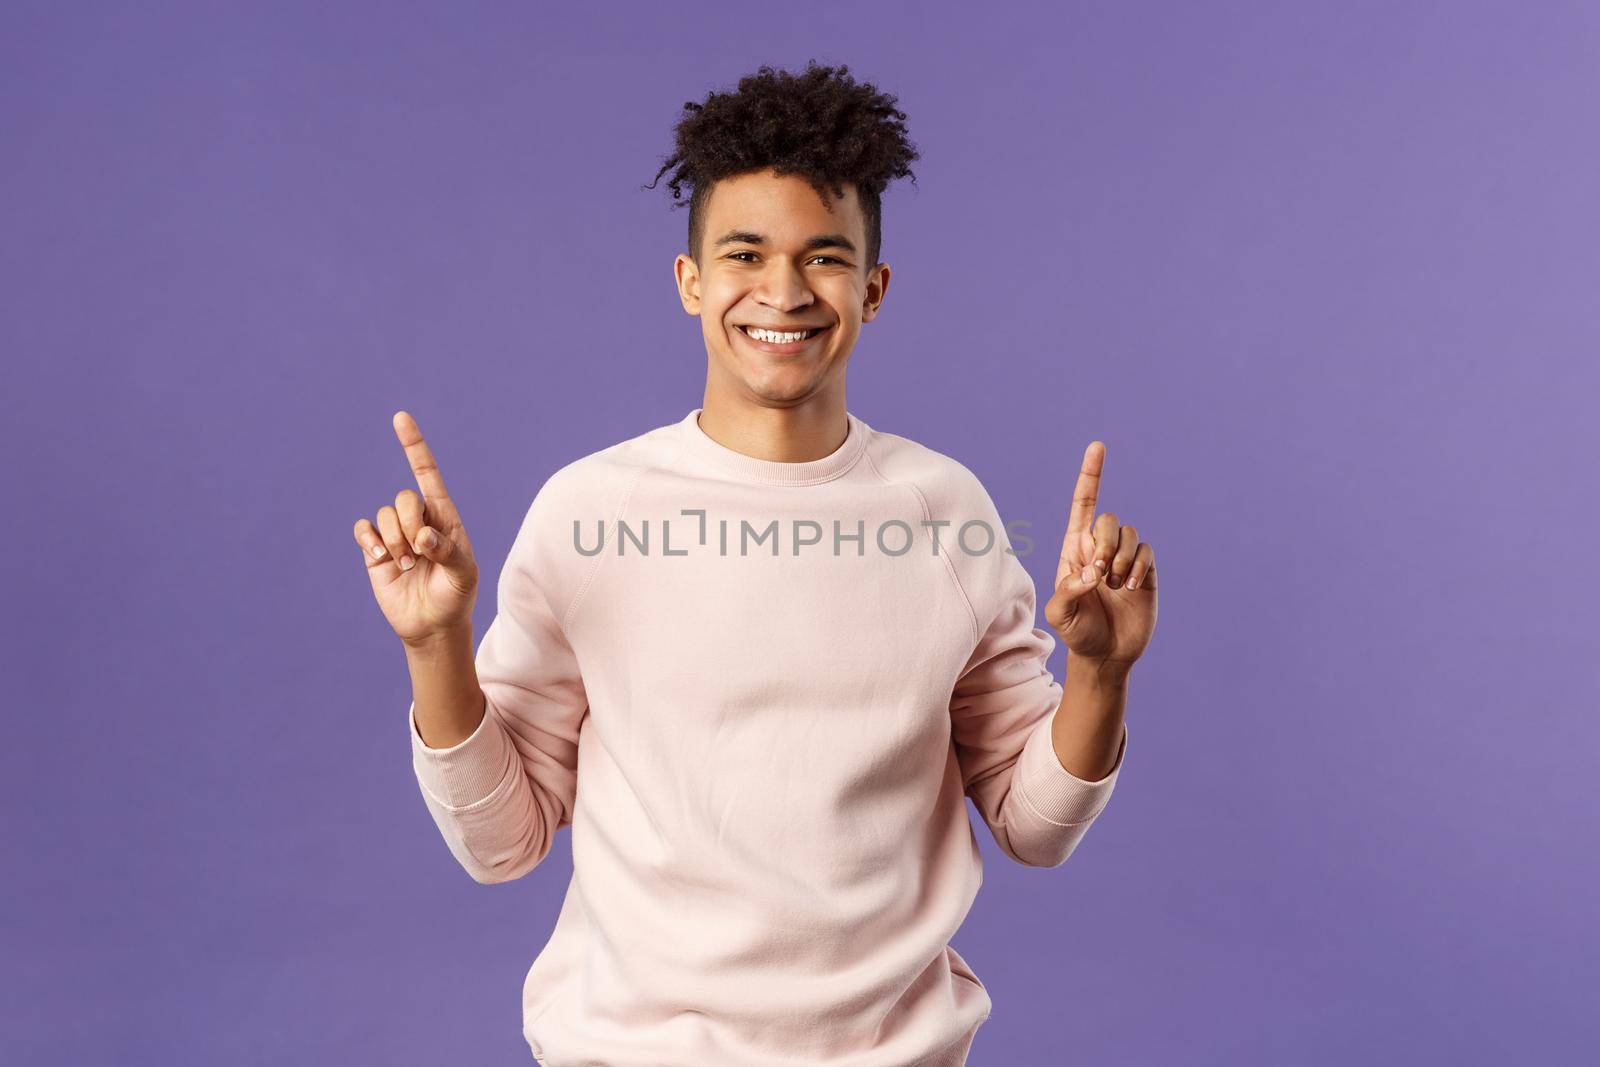 Waist-up portrait of joyful good-looking hispanic man with dreads, promoting product or company banner hanging on top, pointing fingers up, smiling satisfied, recommend subscribe or click link.